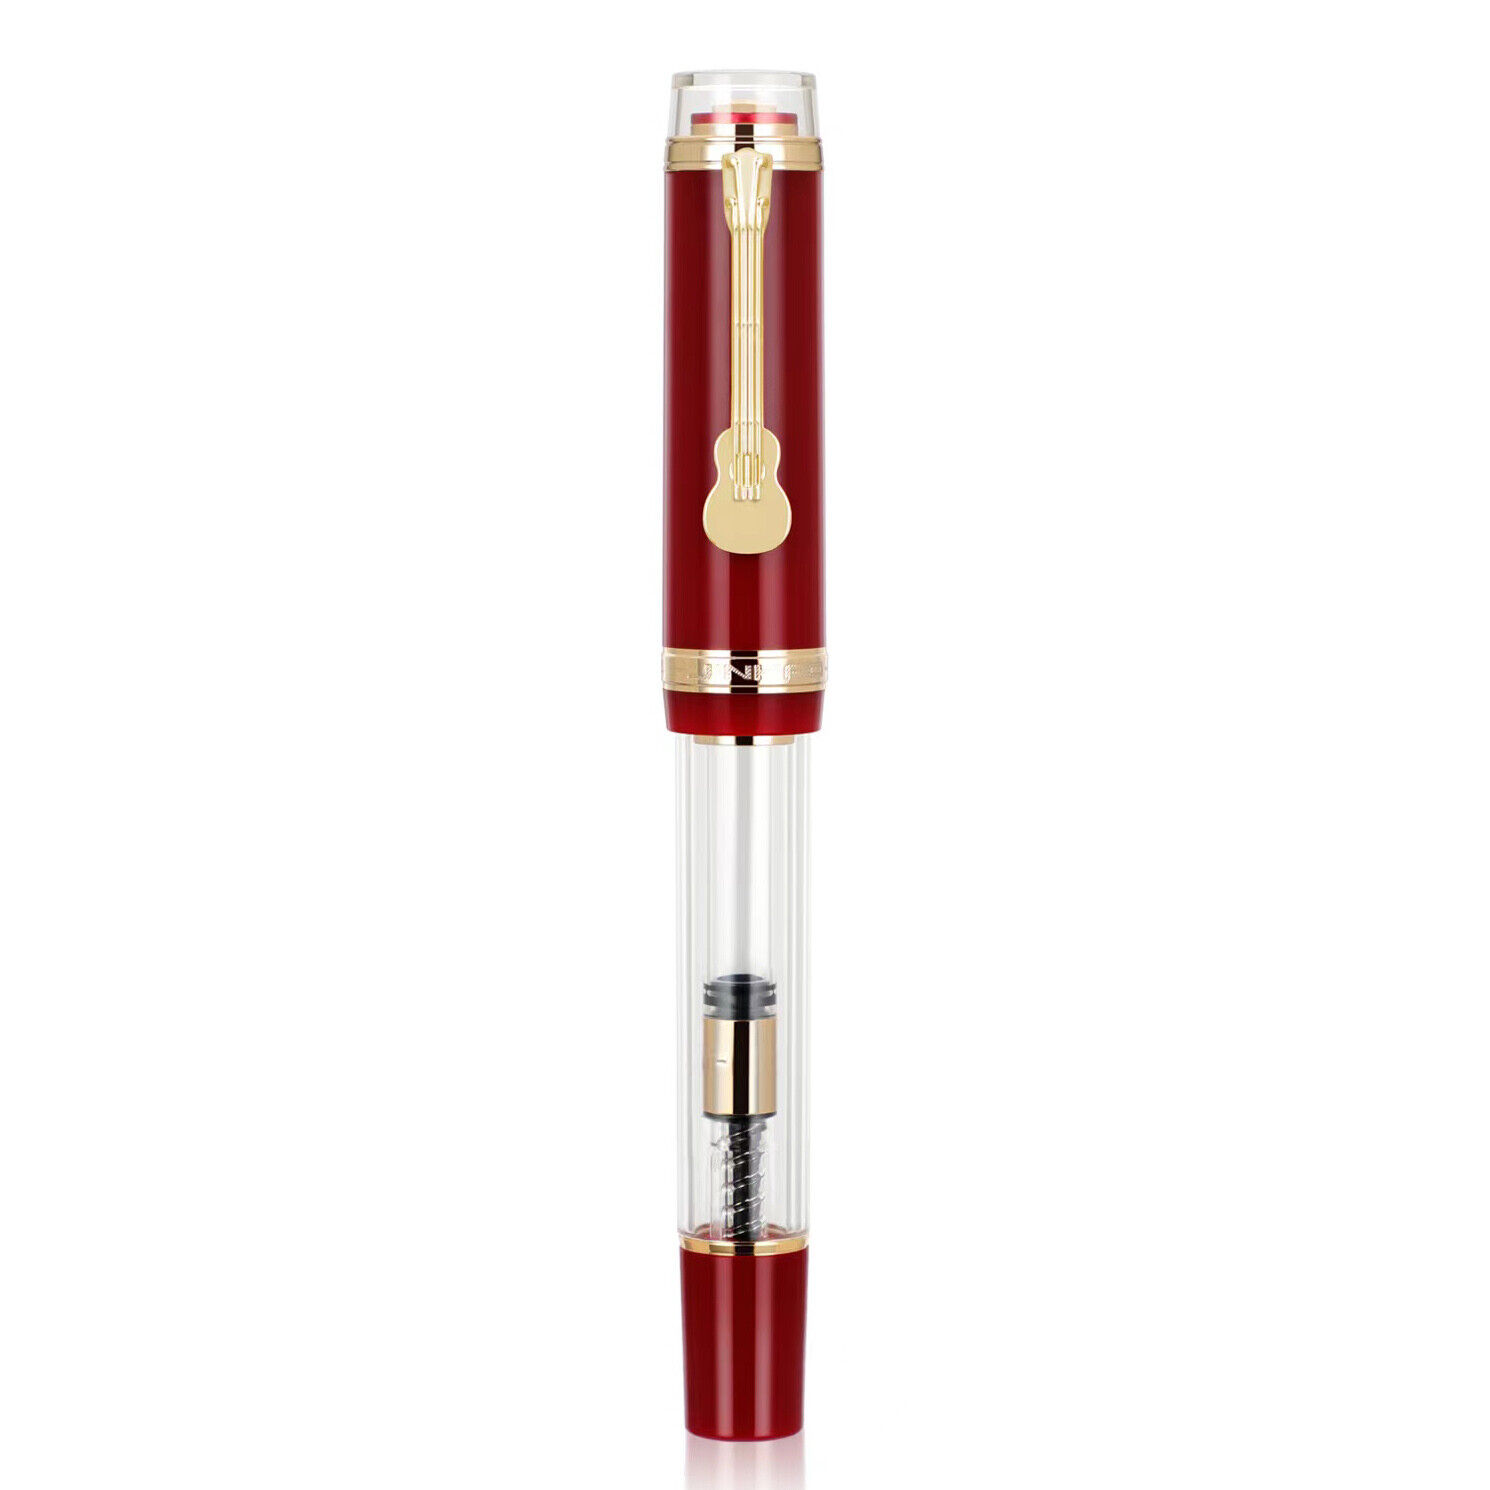 Jinhao 1935 Fountain Pen #8 F/M Nib with Guitar Clip, Red Resin Writing Gift Pen